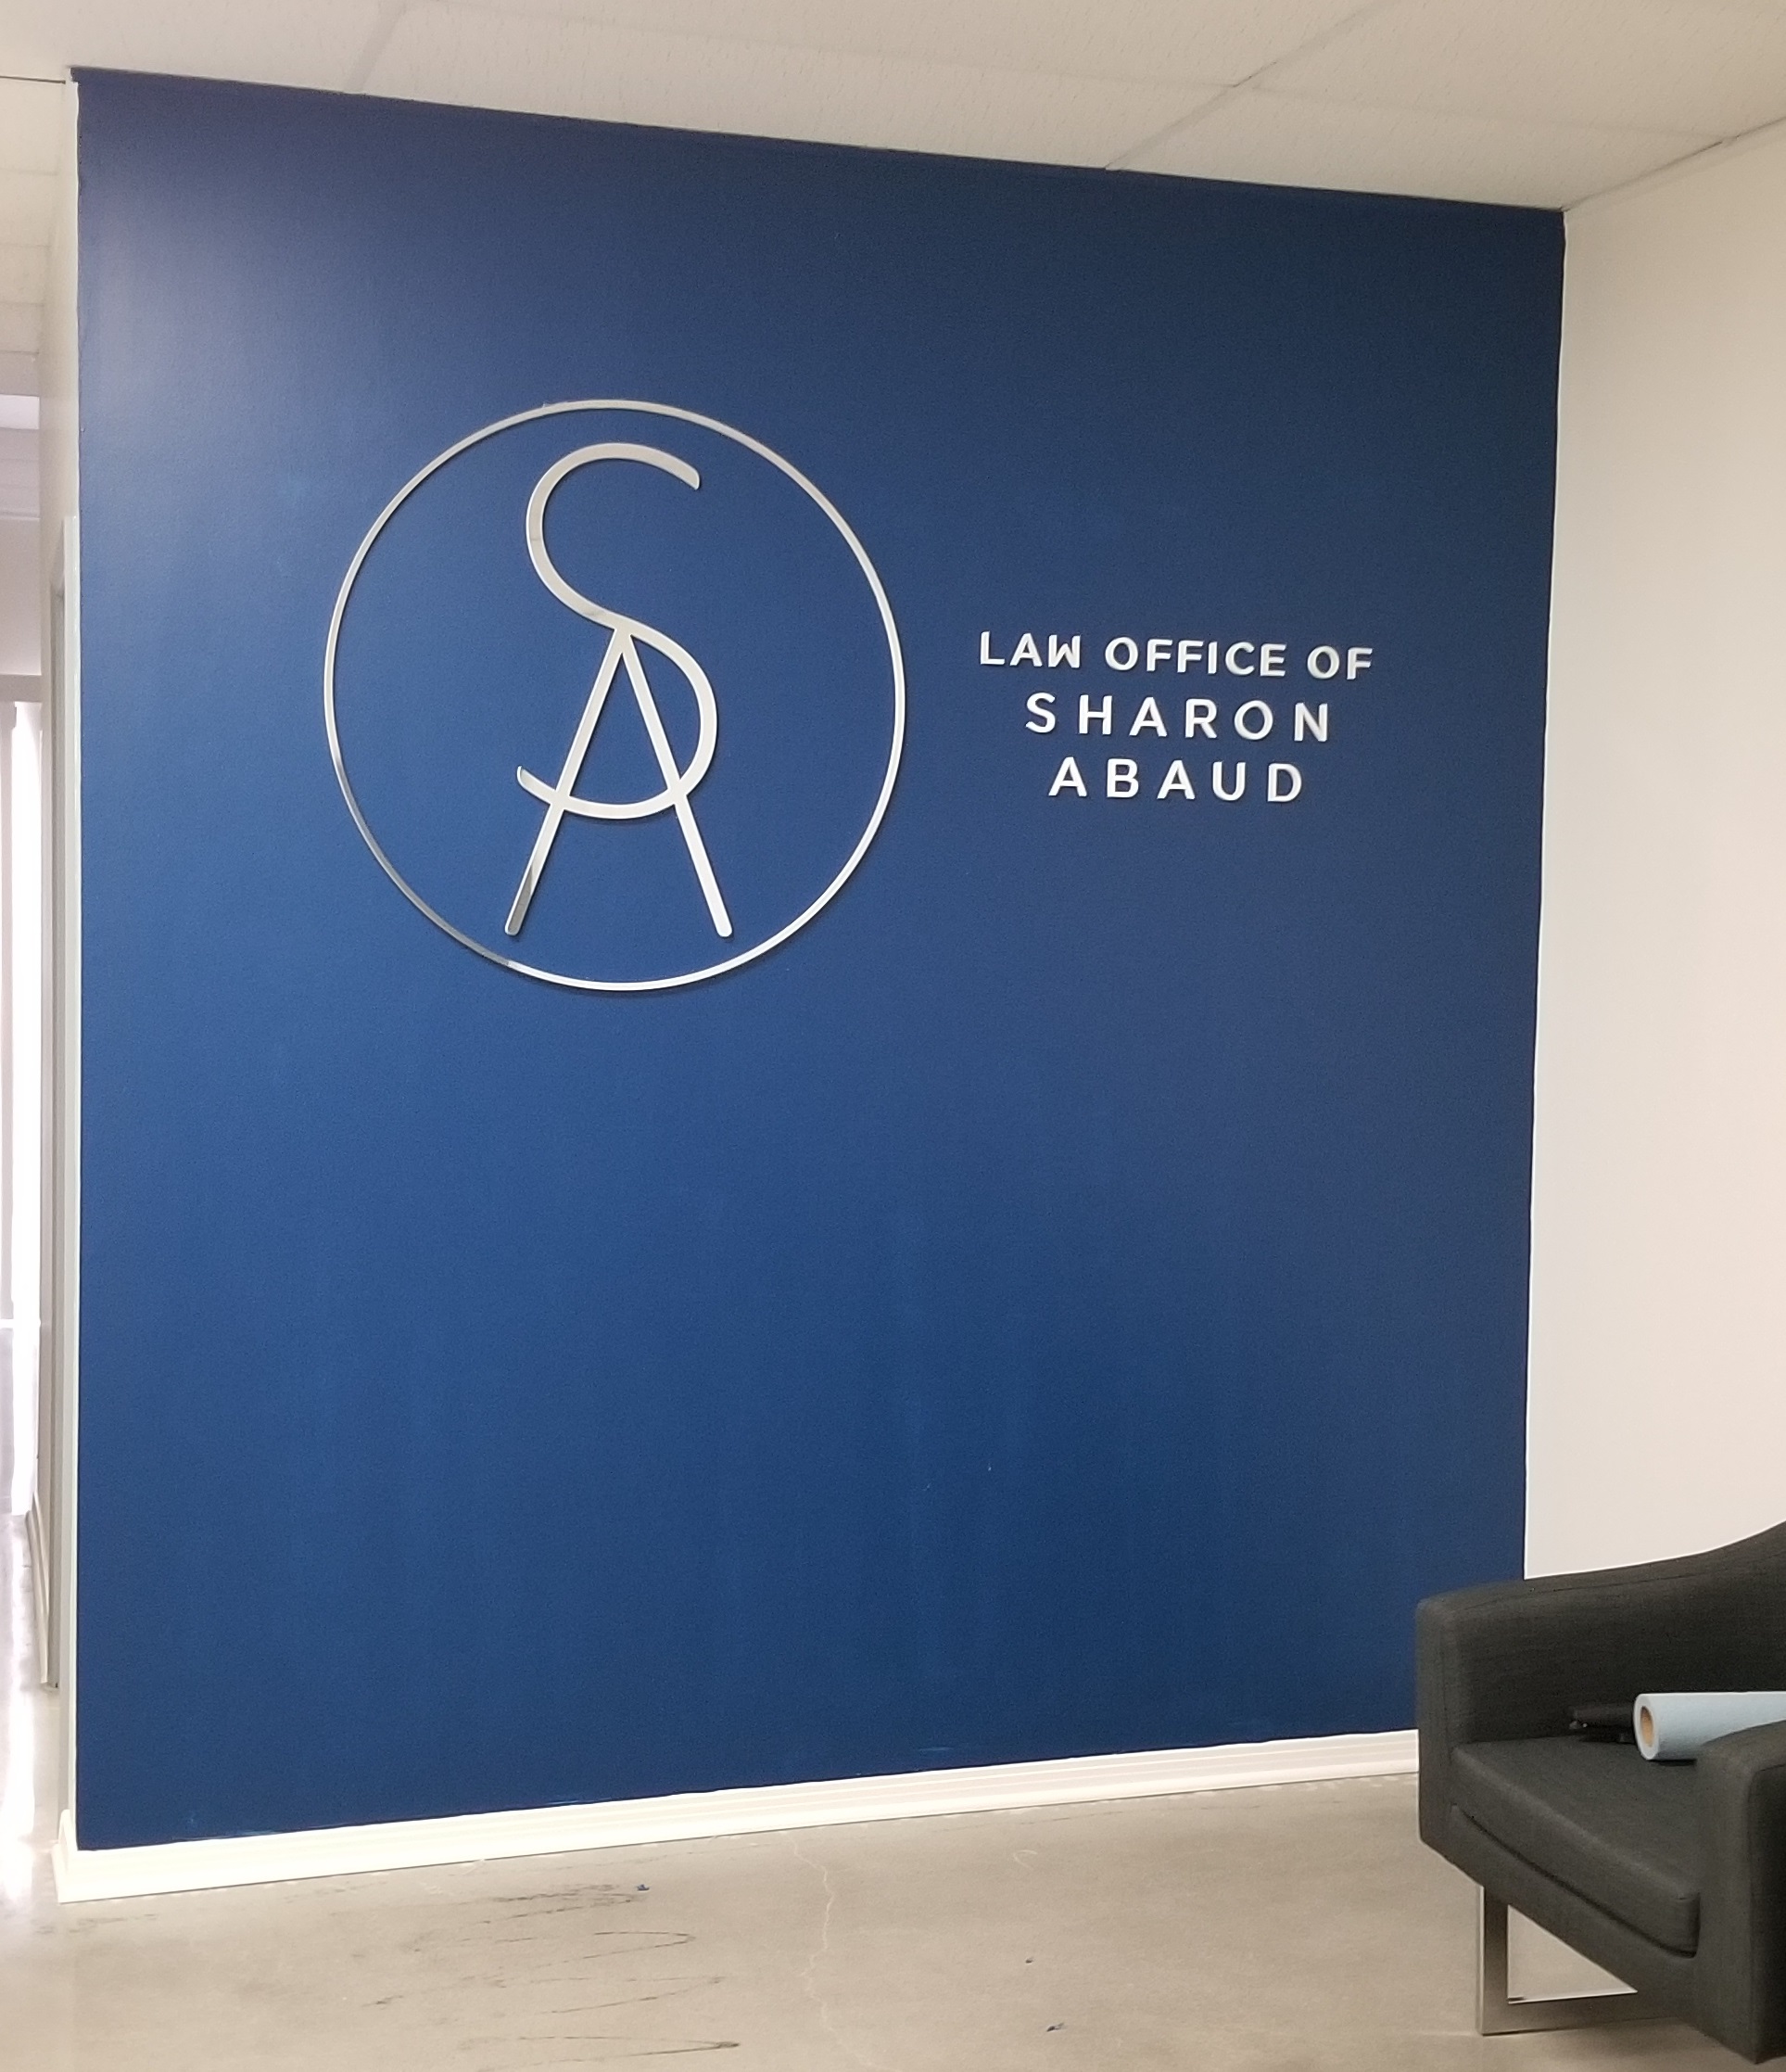 This is the laser-cut acrylic lobby sign we made for the Torrance law office of immigration lawyer Sharon Abaud.